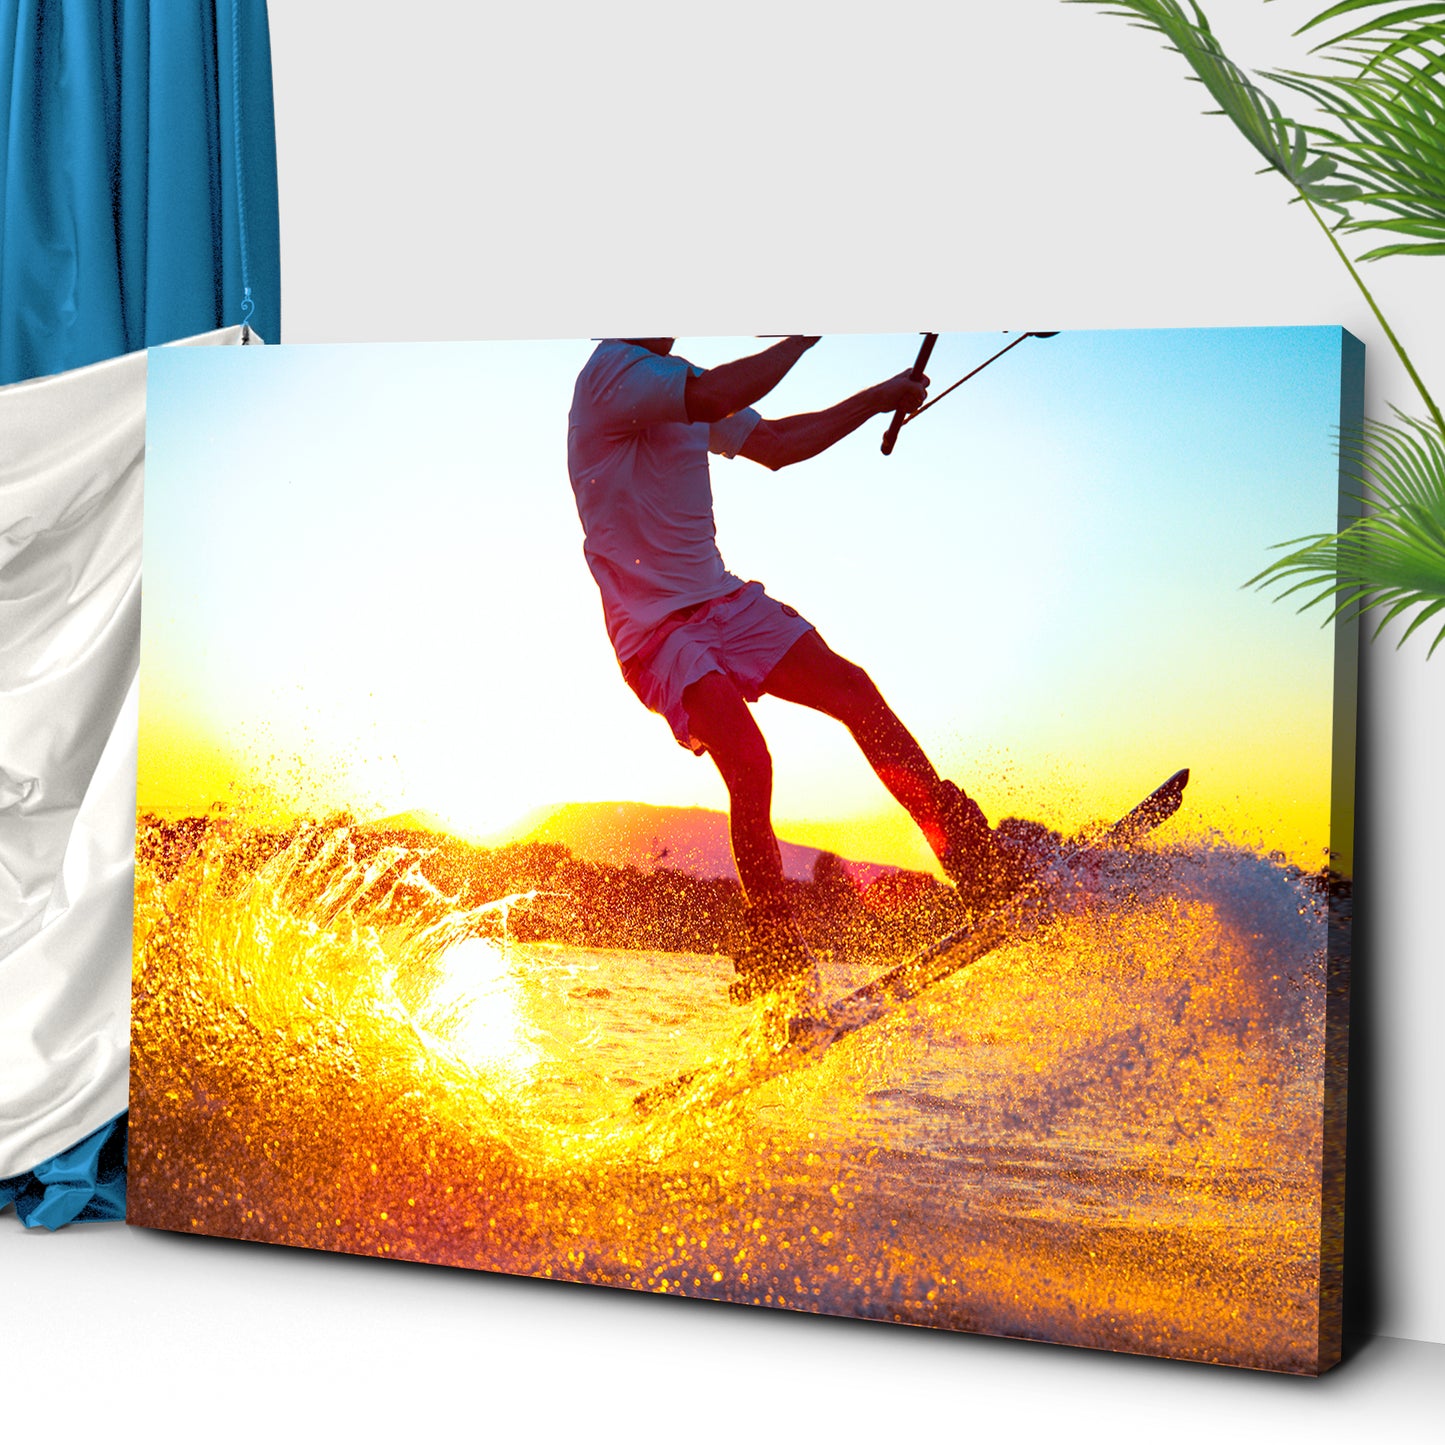 Wakeboard Sunset Canvas Wall Art Style 2 - Image by Tailored Canvases